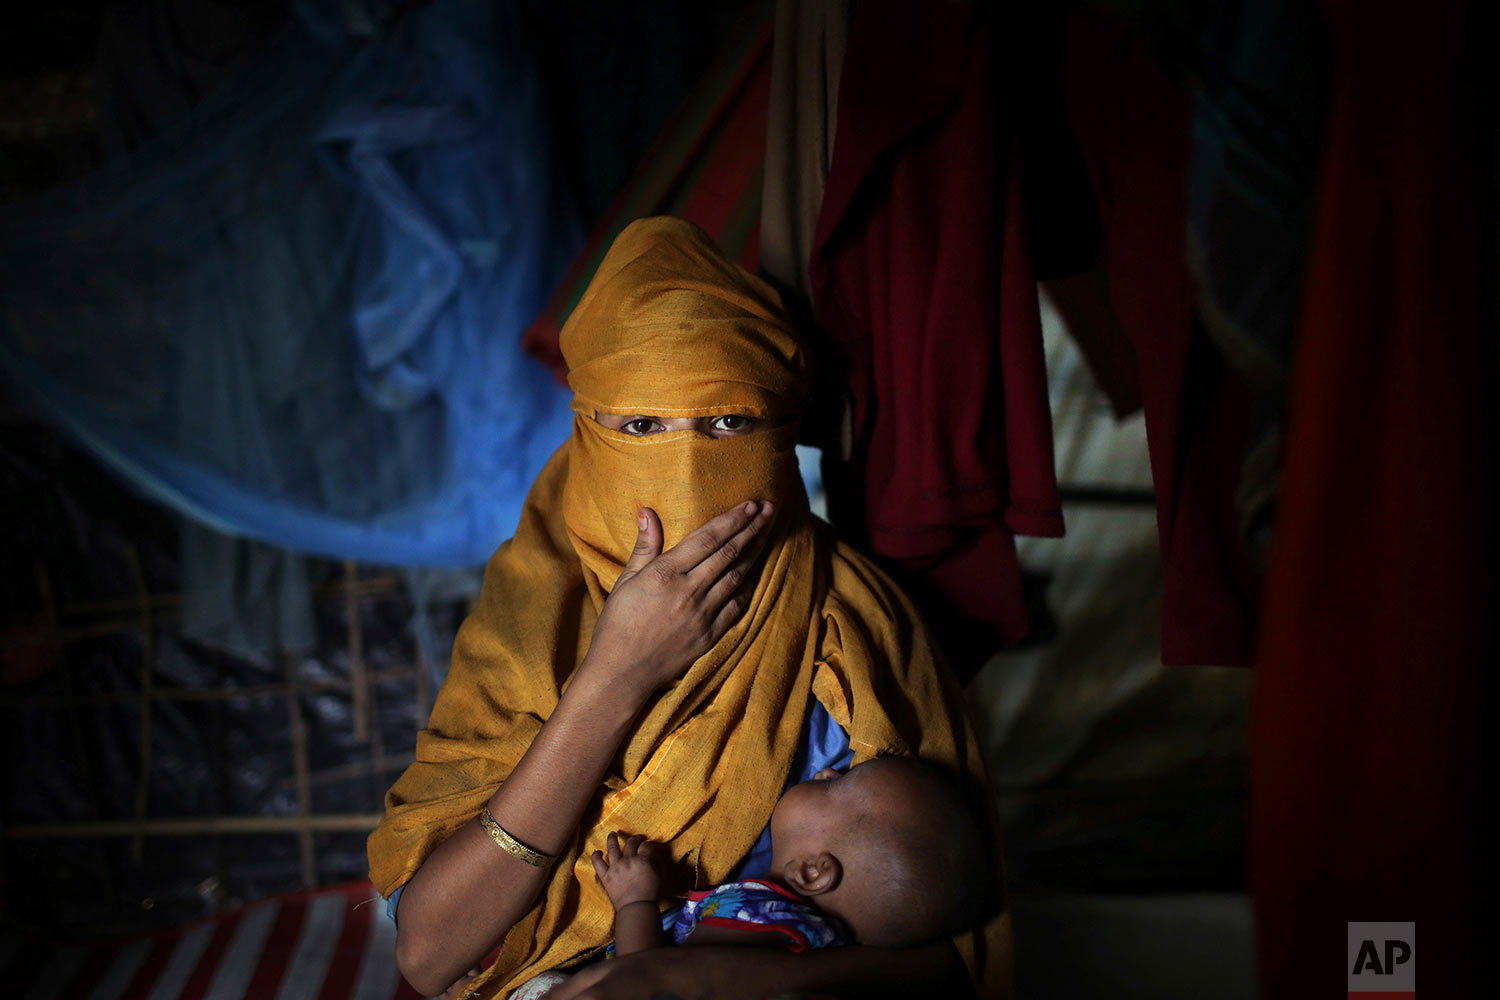  In this Wednesday, Nov. 22, 2017, photo, S, 16, mother of baby boy, who says she was raped by members of Myanmar's armed forces in early August carries her baby while being photographed in her tent in Kutupalong refugee camp in Bangladesh.  (AP Phot